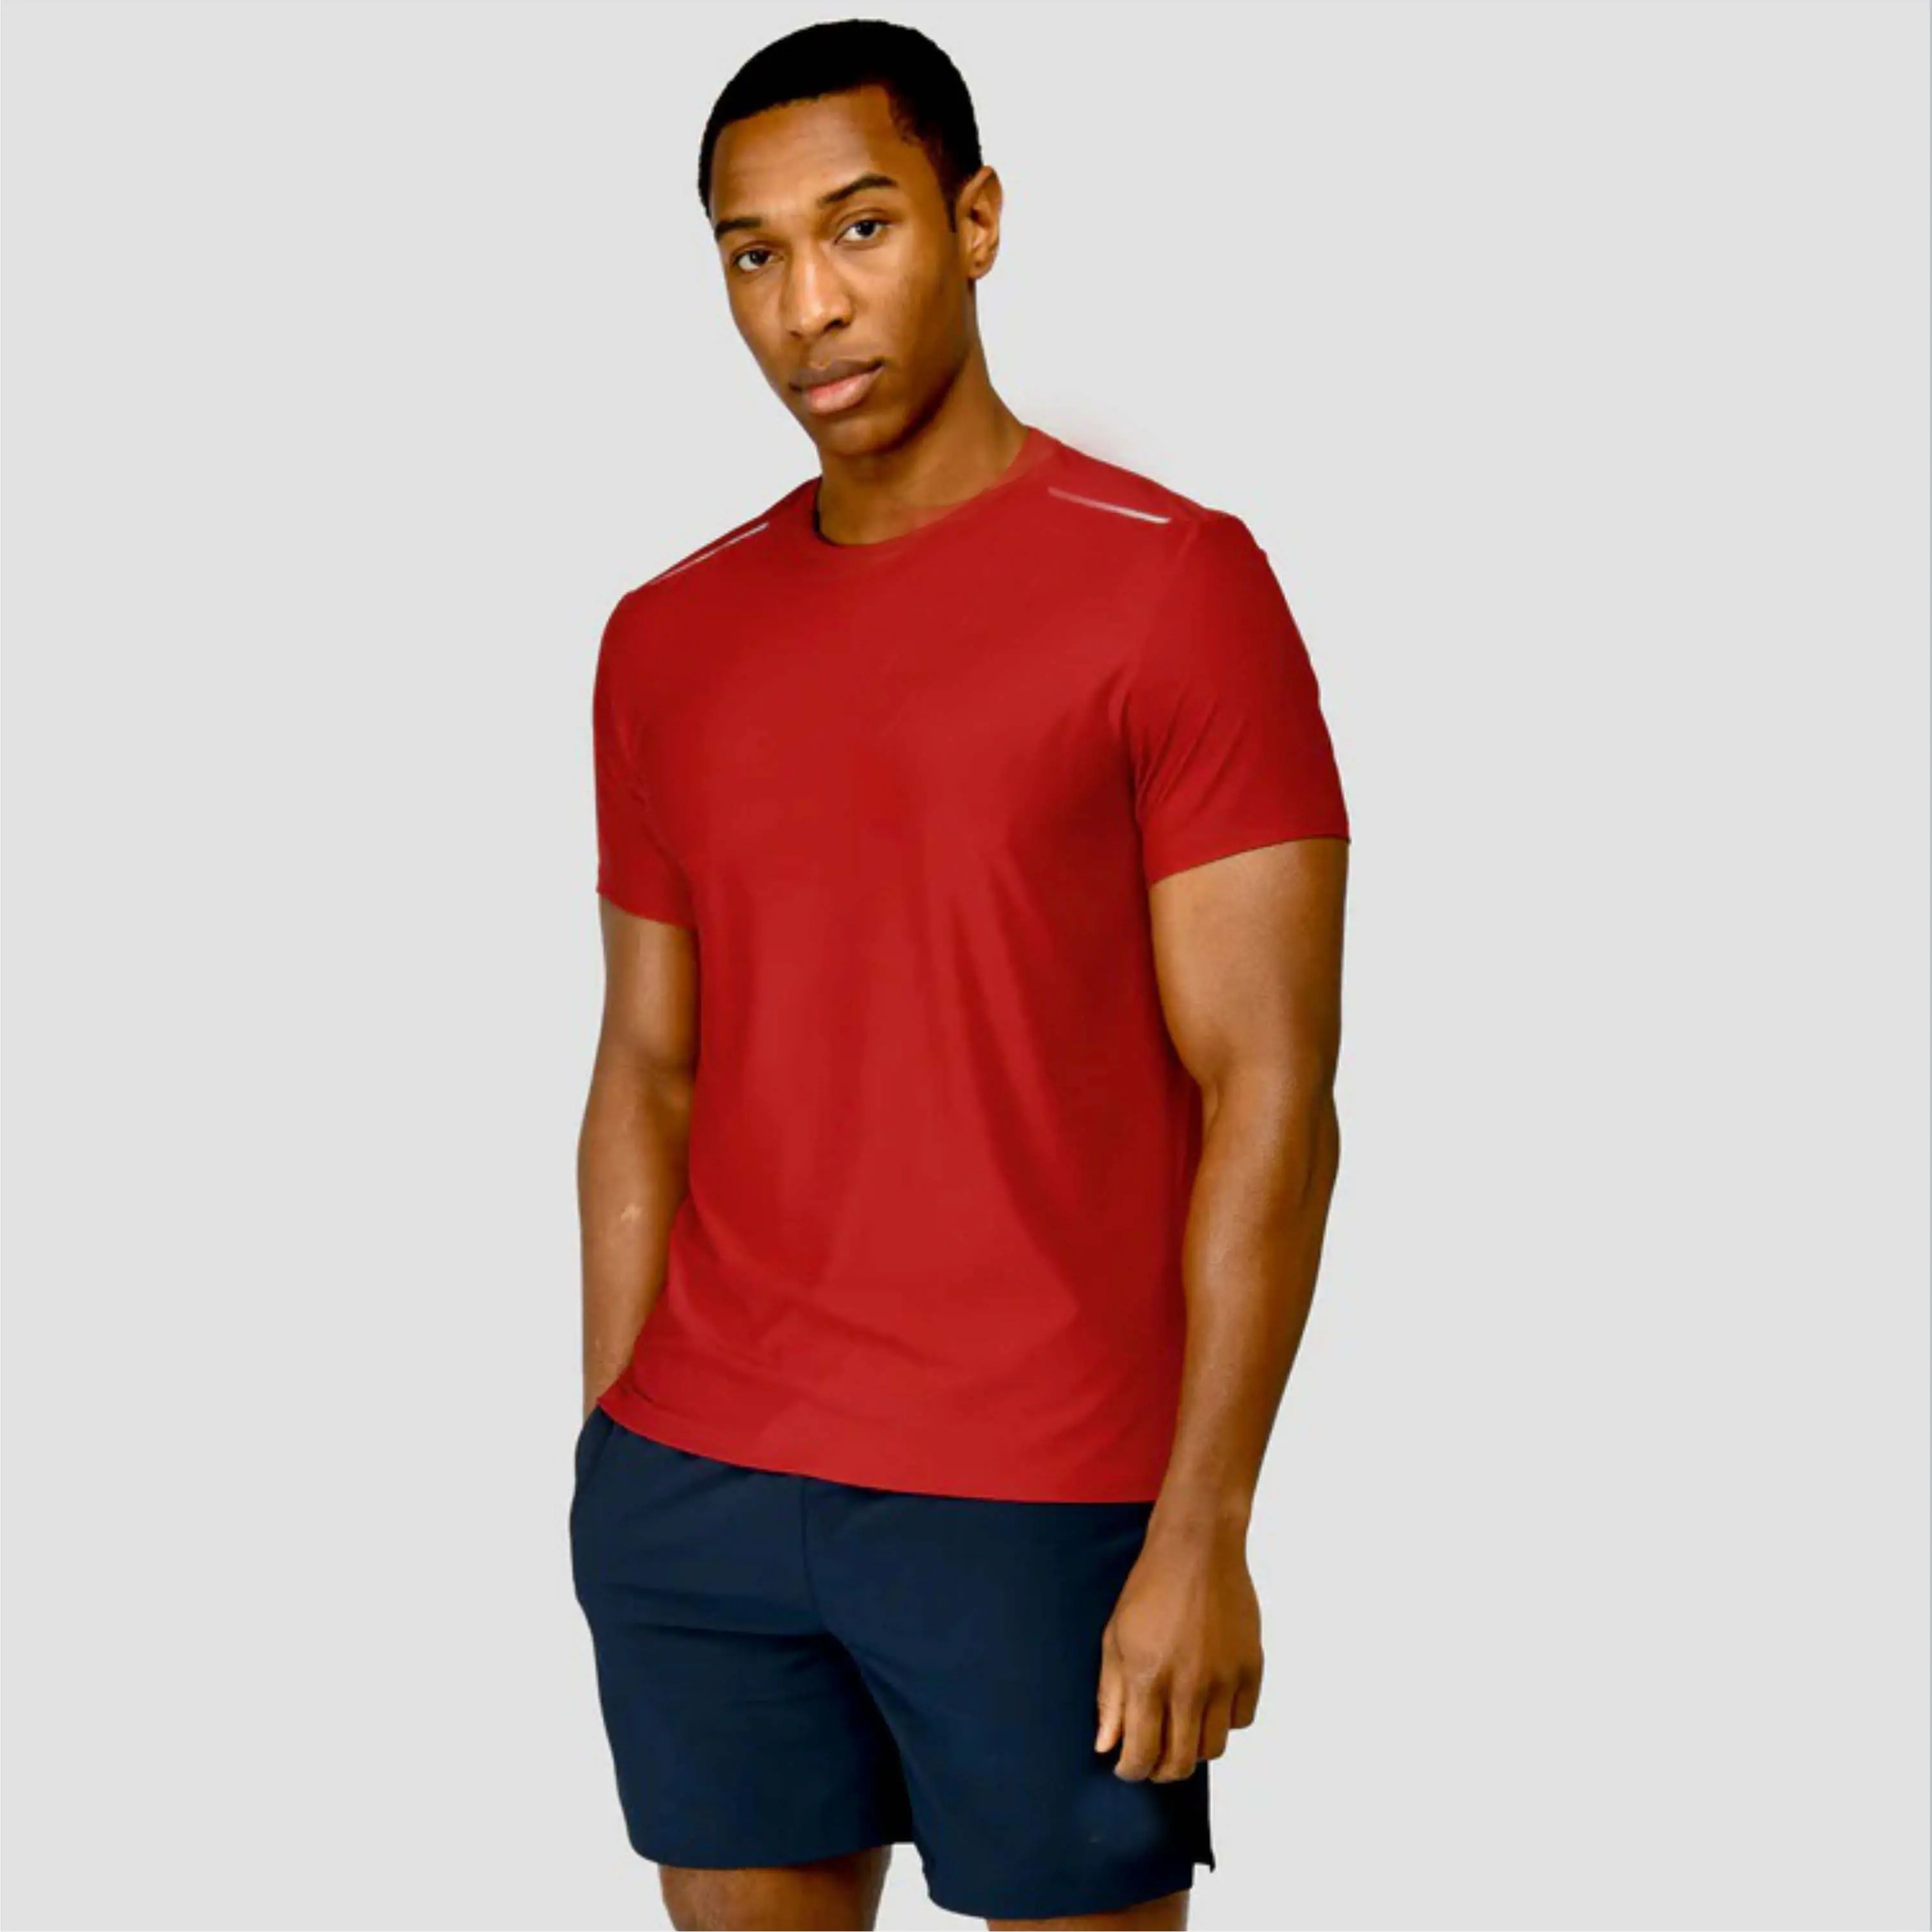 Fashionable Men's Nylon Spandex T-Shirt with Soft Fabric and Modern Look for Casual Outfits